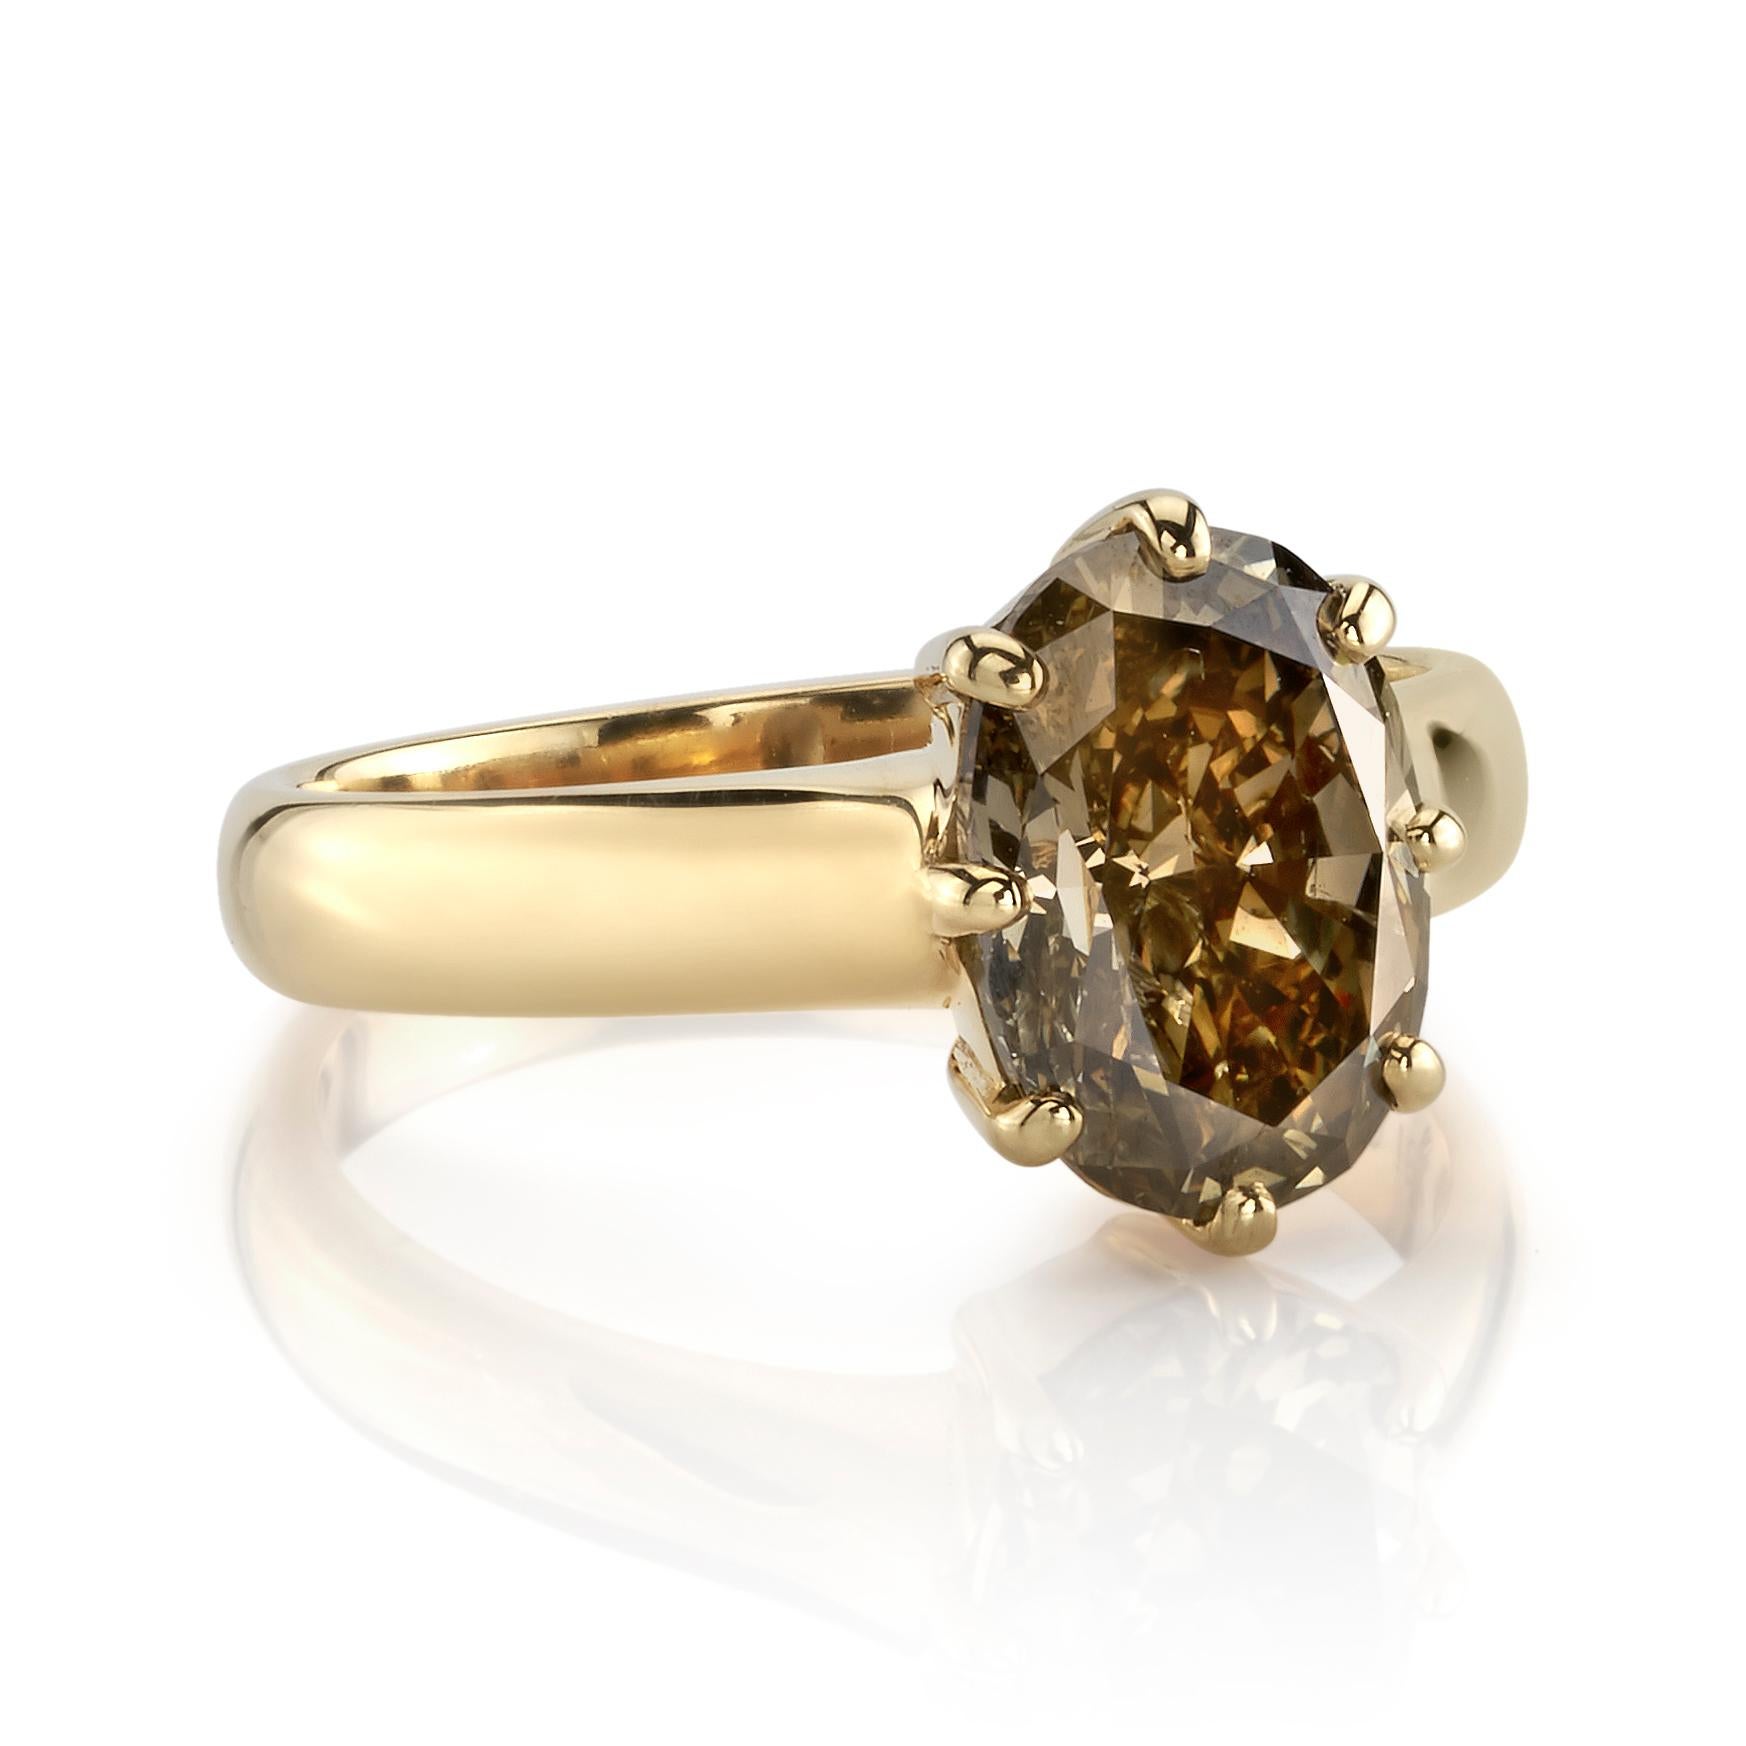 2.40ctw Fancy Dark Brown/I1 GIA certified Oval cut diamond set in a handcrafted 18K yellow gold mounting. 

Ring is currently a size 6 and can be sized to fit.

Our jewelry is made locally in Los Angeles and most pieces are made to order. For these